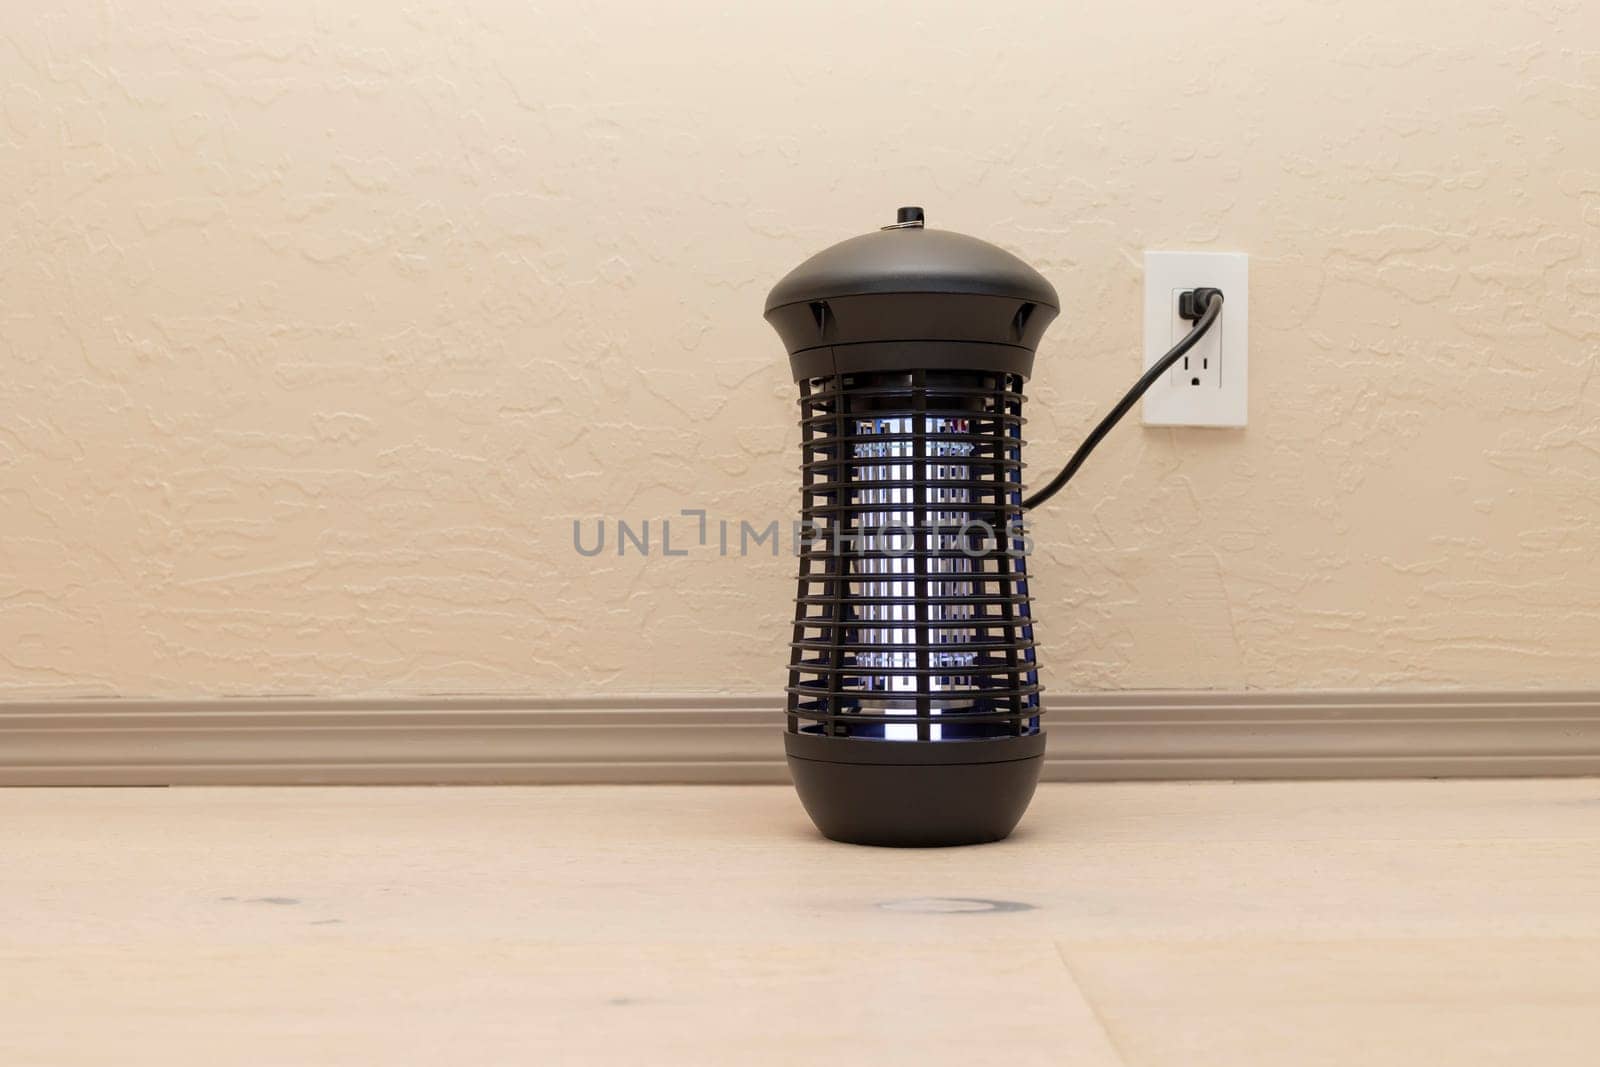 Electric Hanging Bug Killer Lamp . Mosquito and Insect Zapper With Blue Purple Lights .on Wooden Floor in Room. Fly Trap for Outdoor and Indoor. Copy Space For Text. Horizontal Plane.